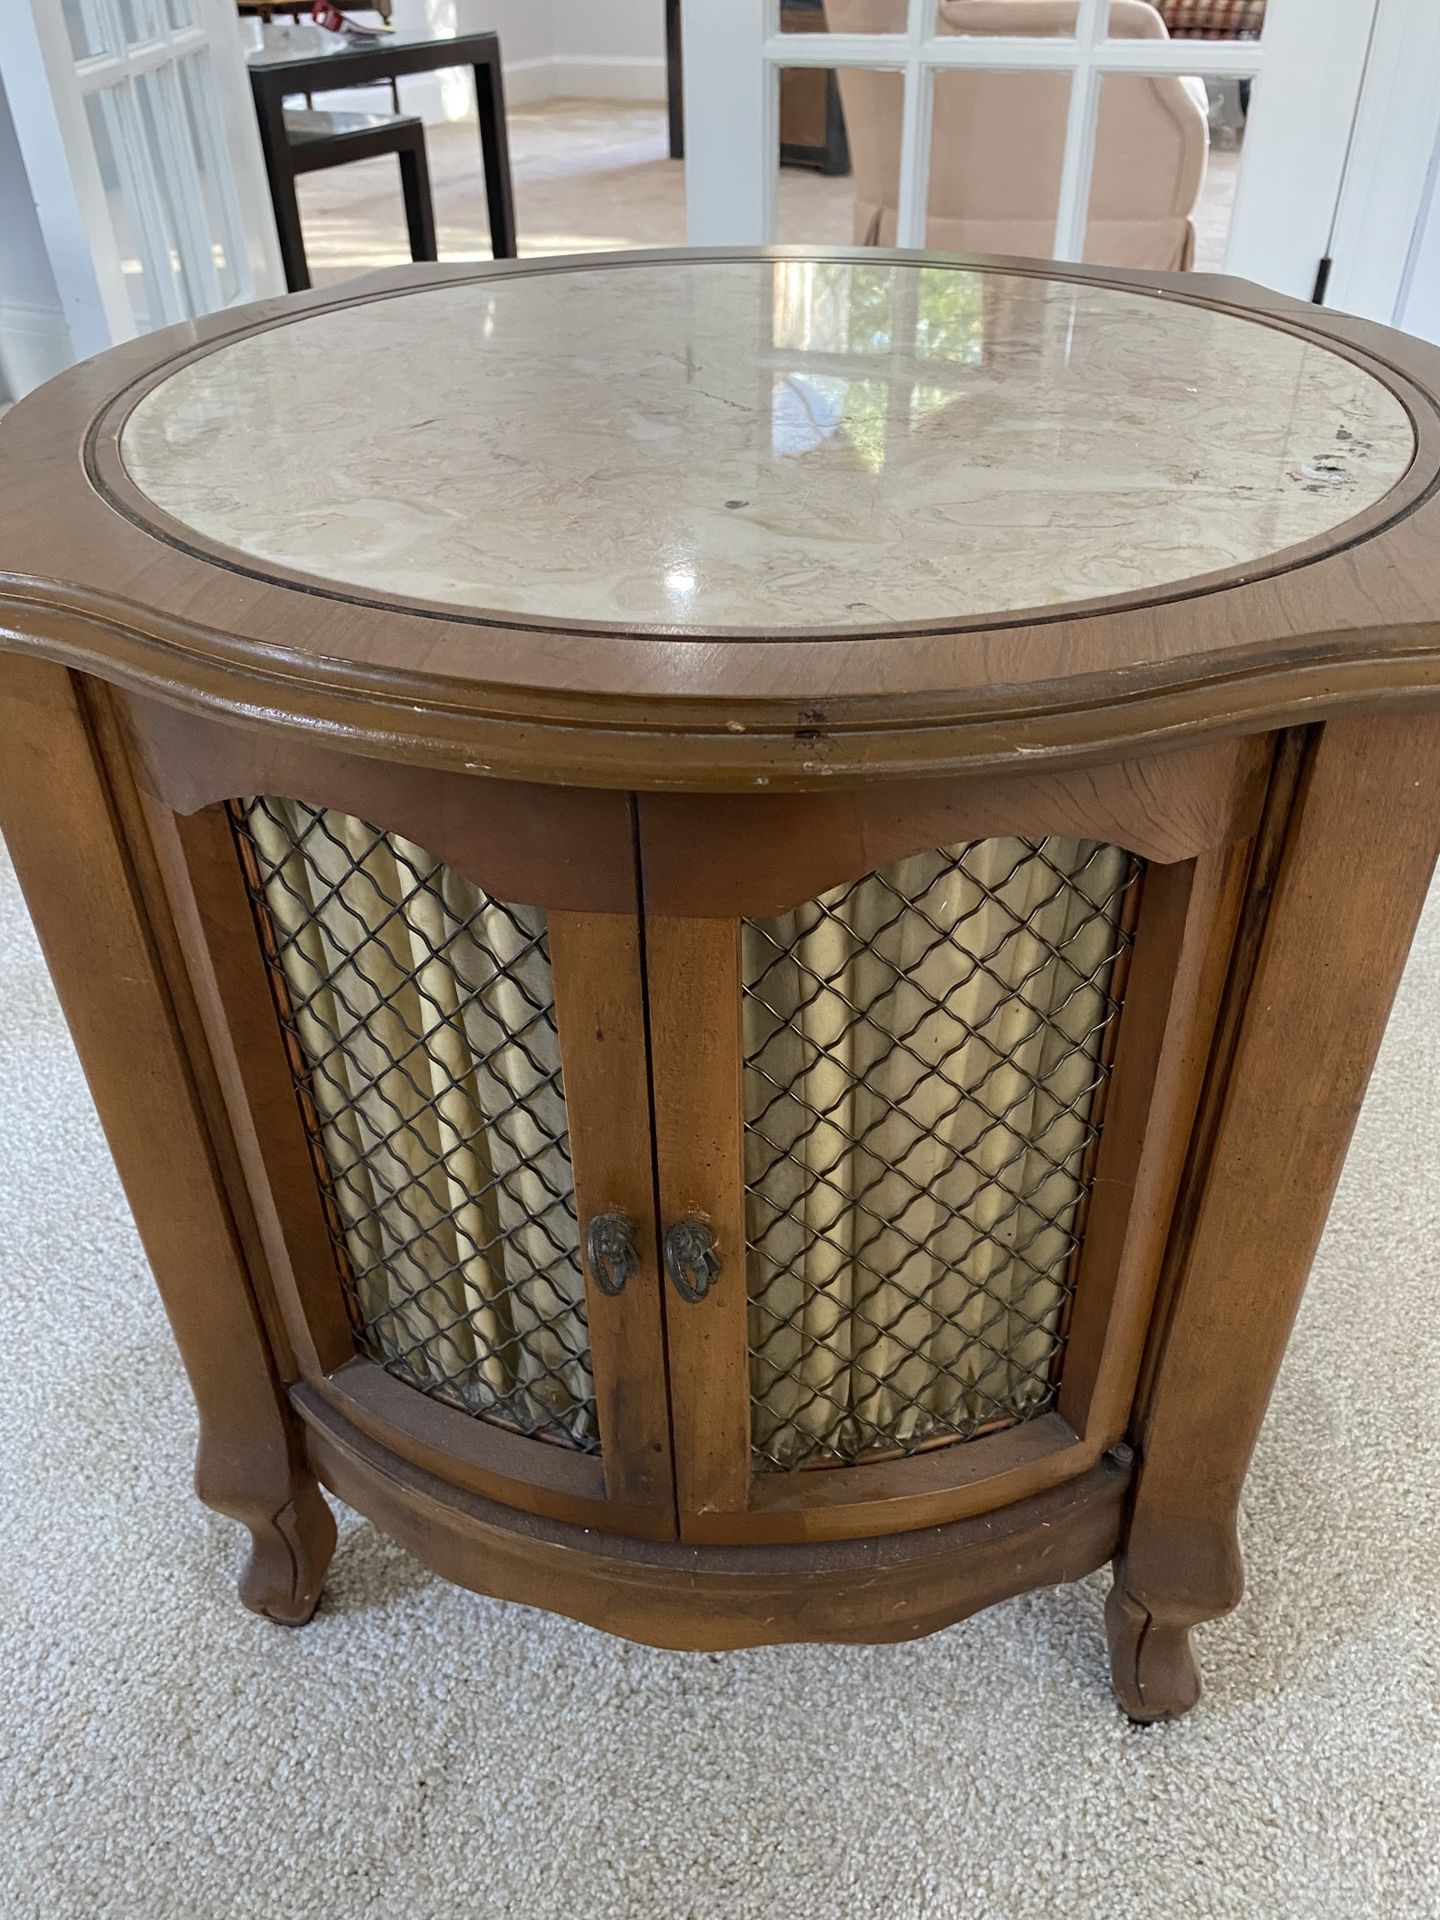 2 Round Coffee Tables